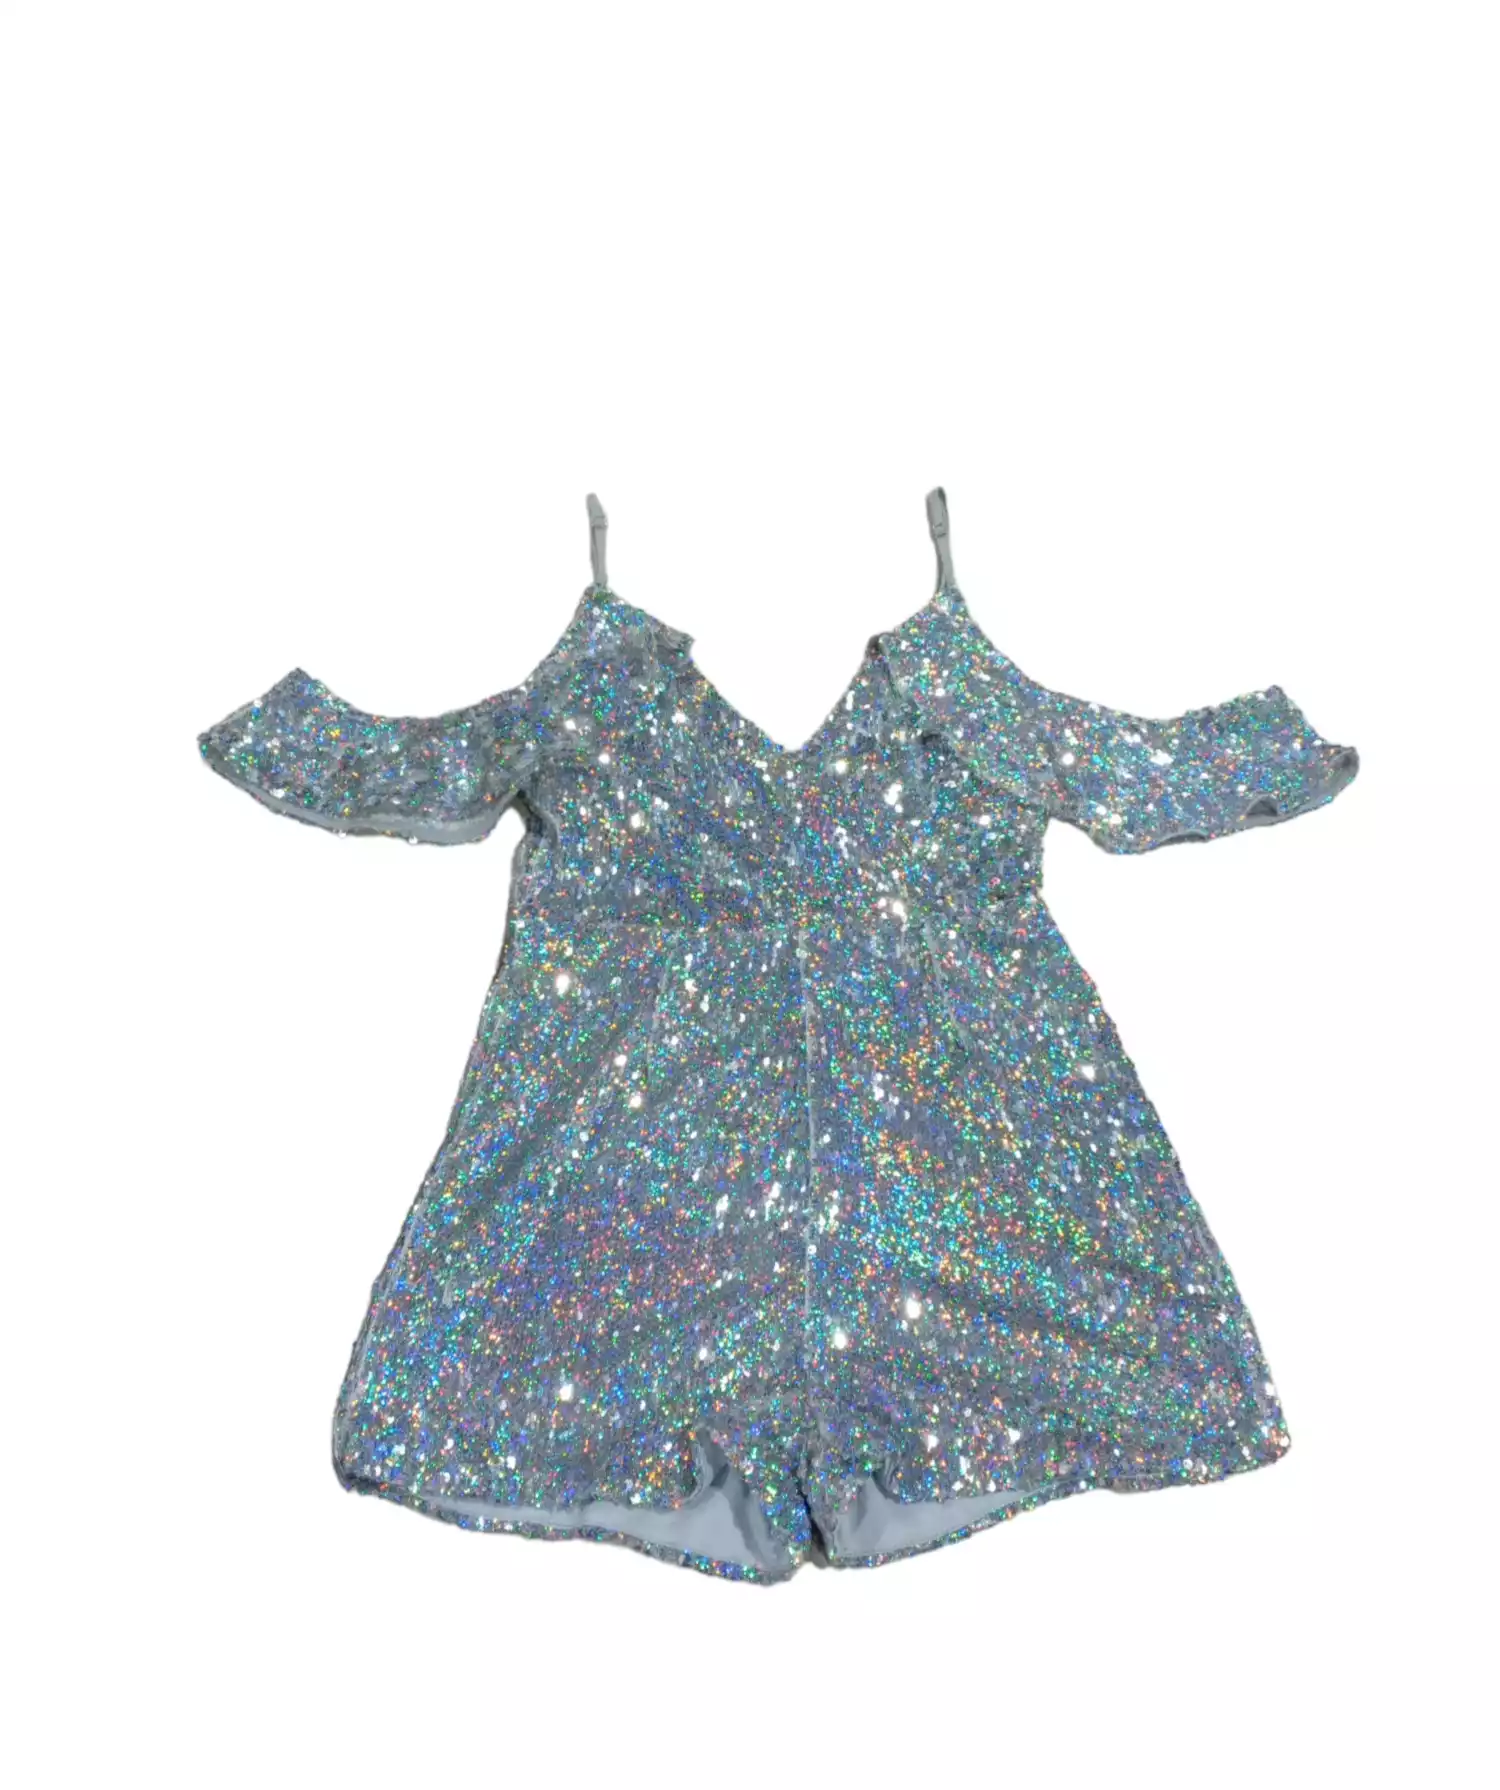 Playsuit by Pretty Little Things